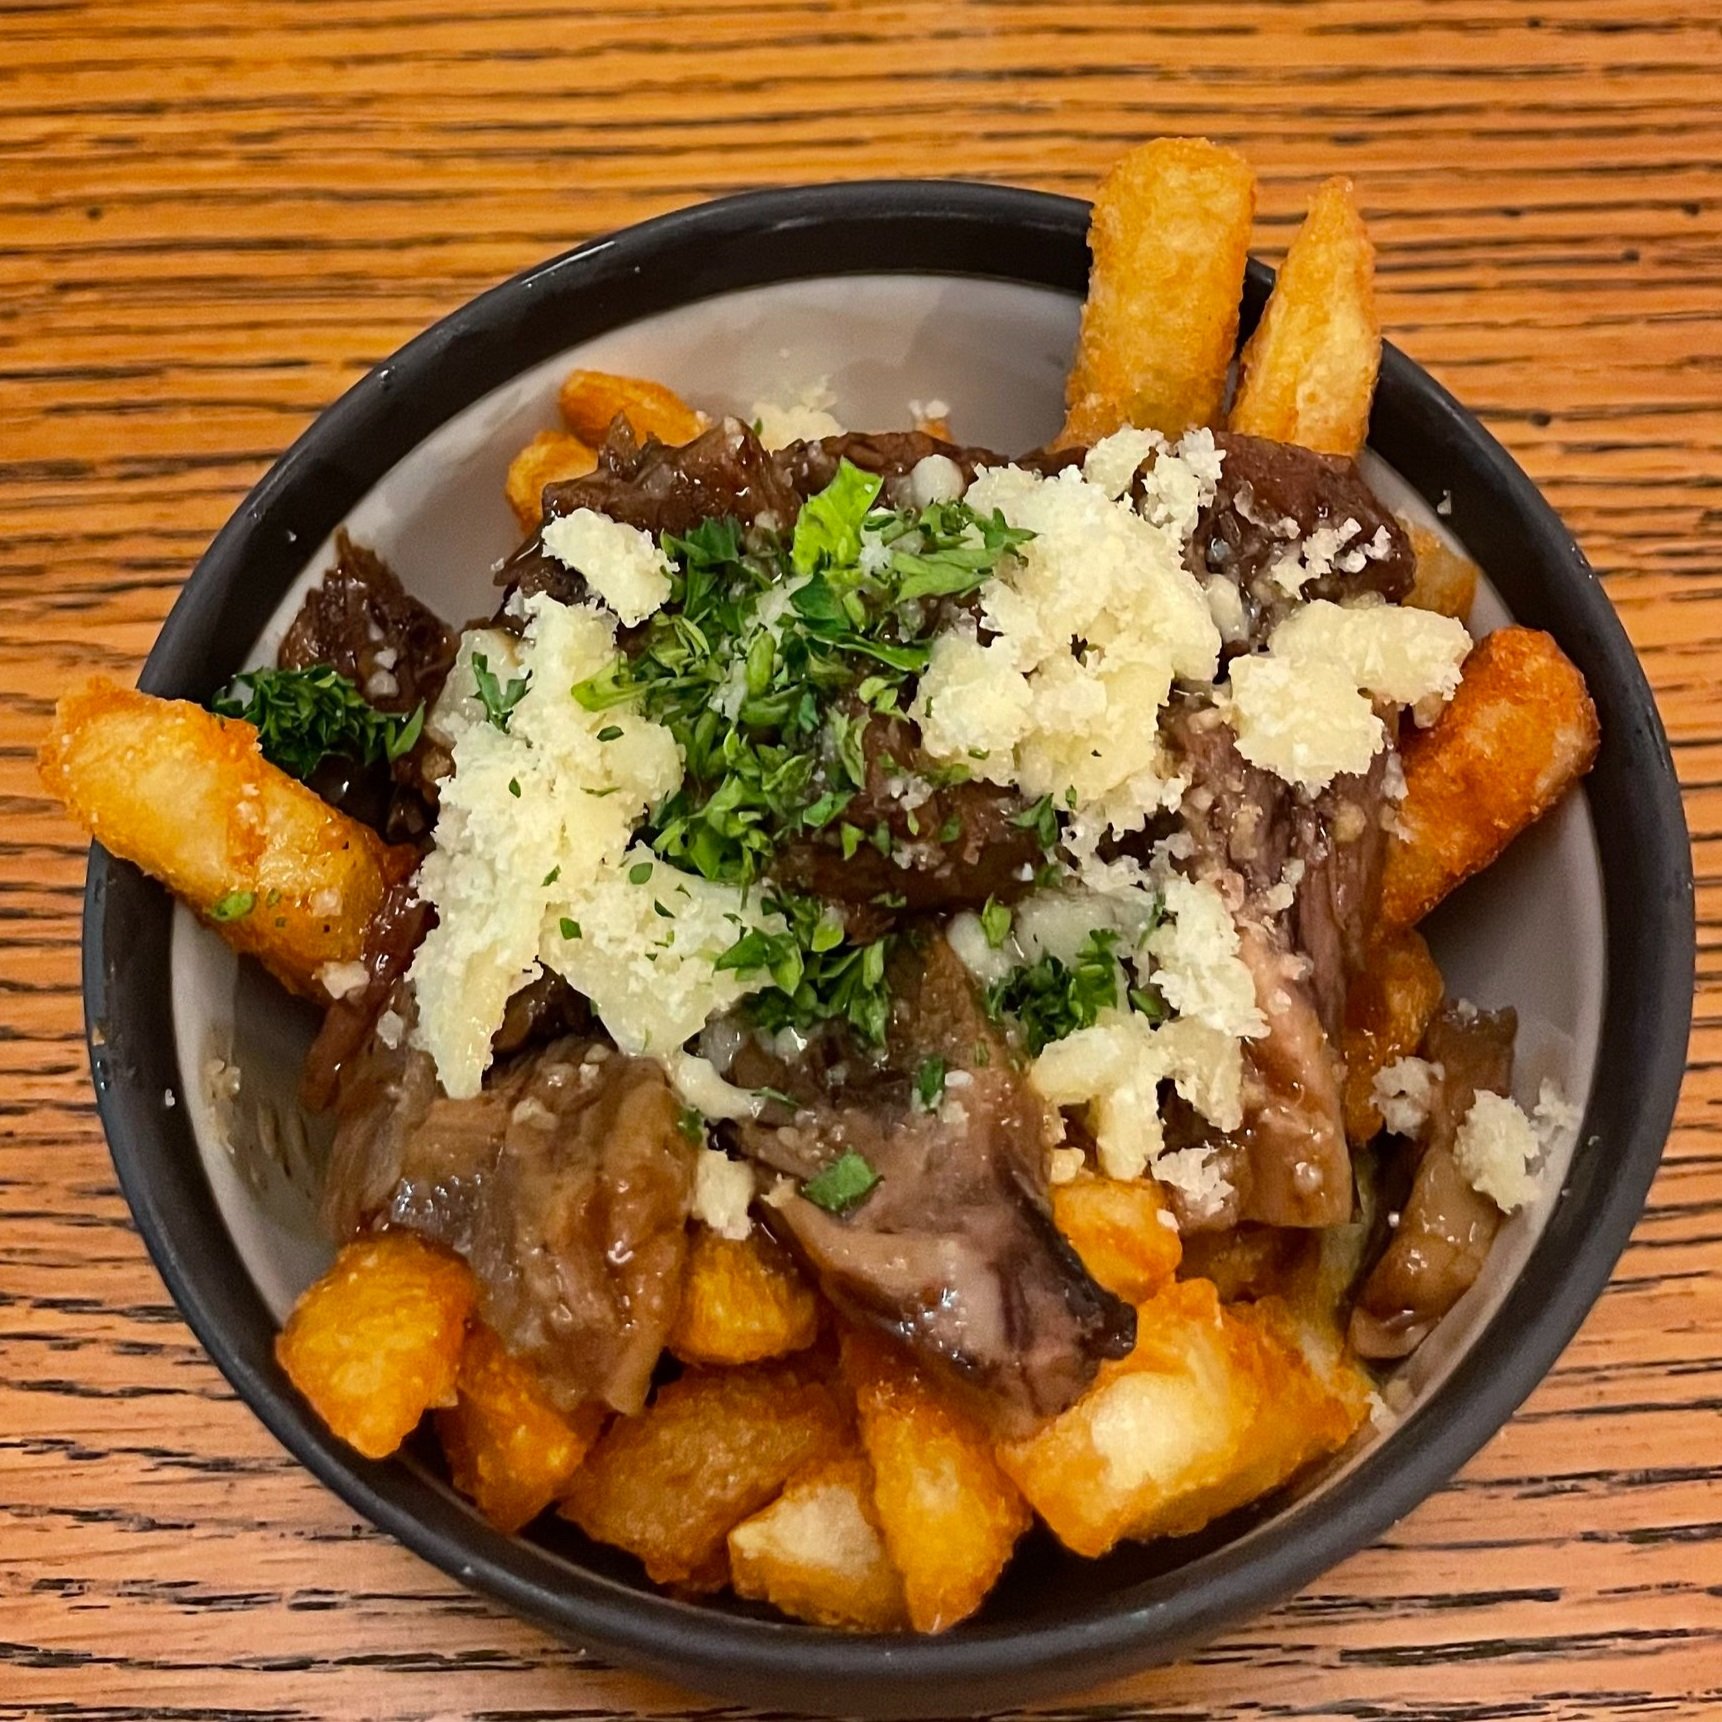 Beef Poutine and fries